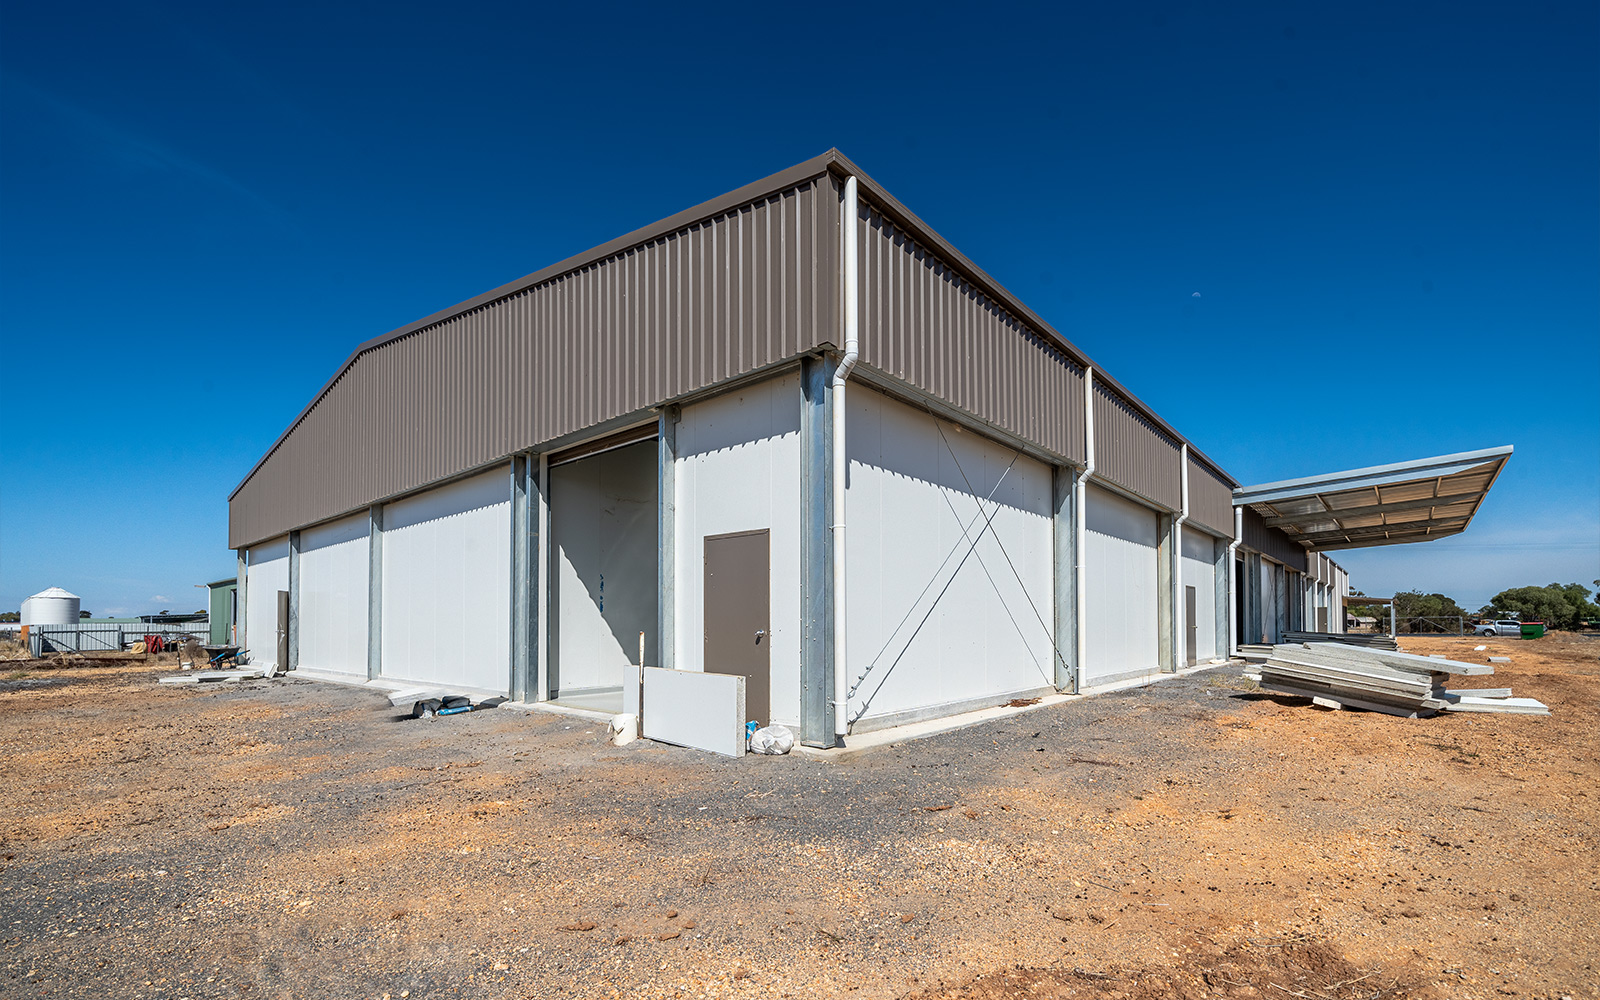 Kookas Country Cookies office and manufacturing shed 